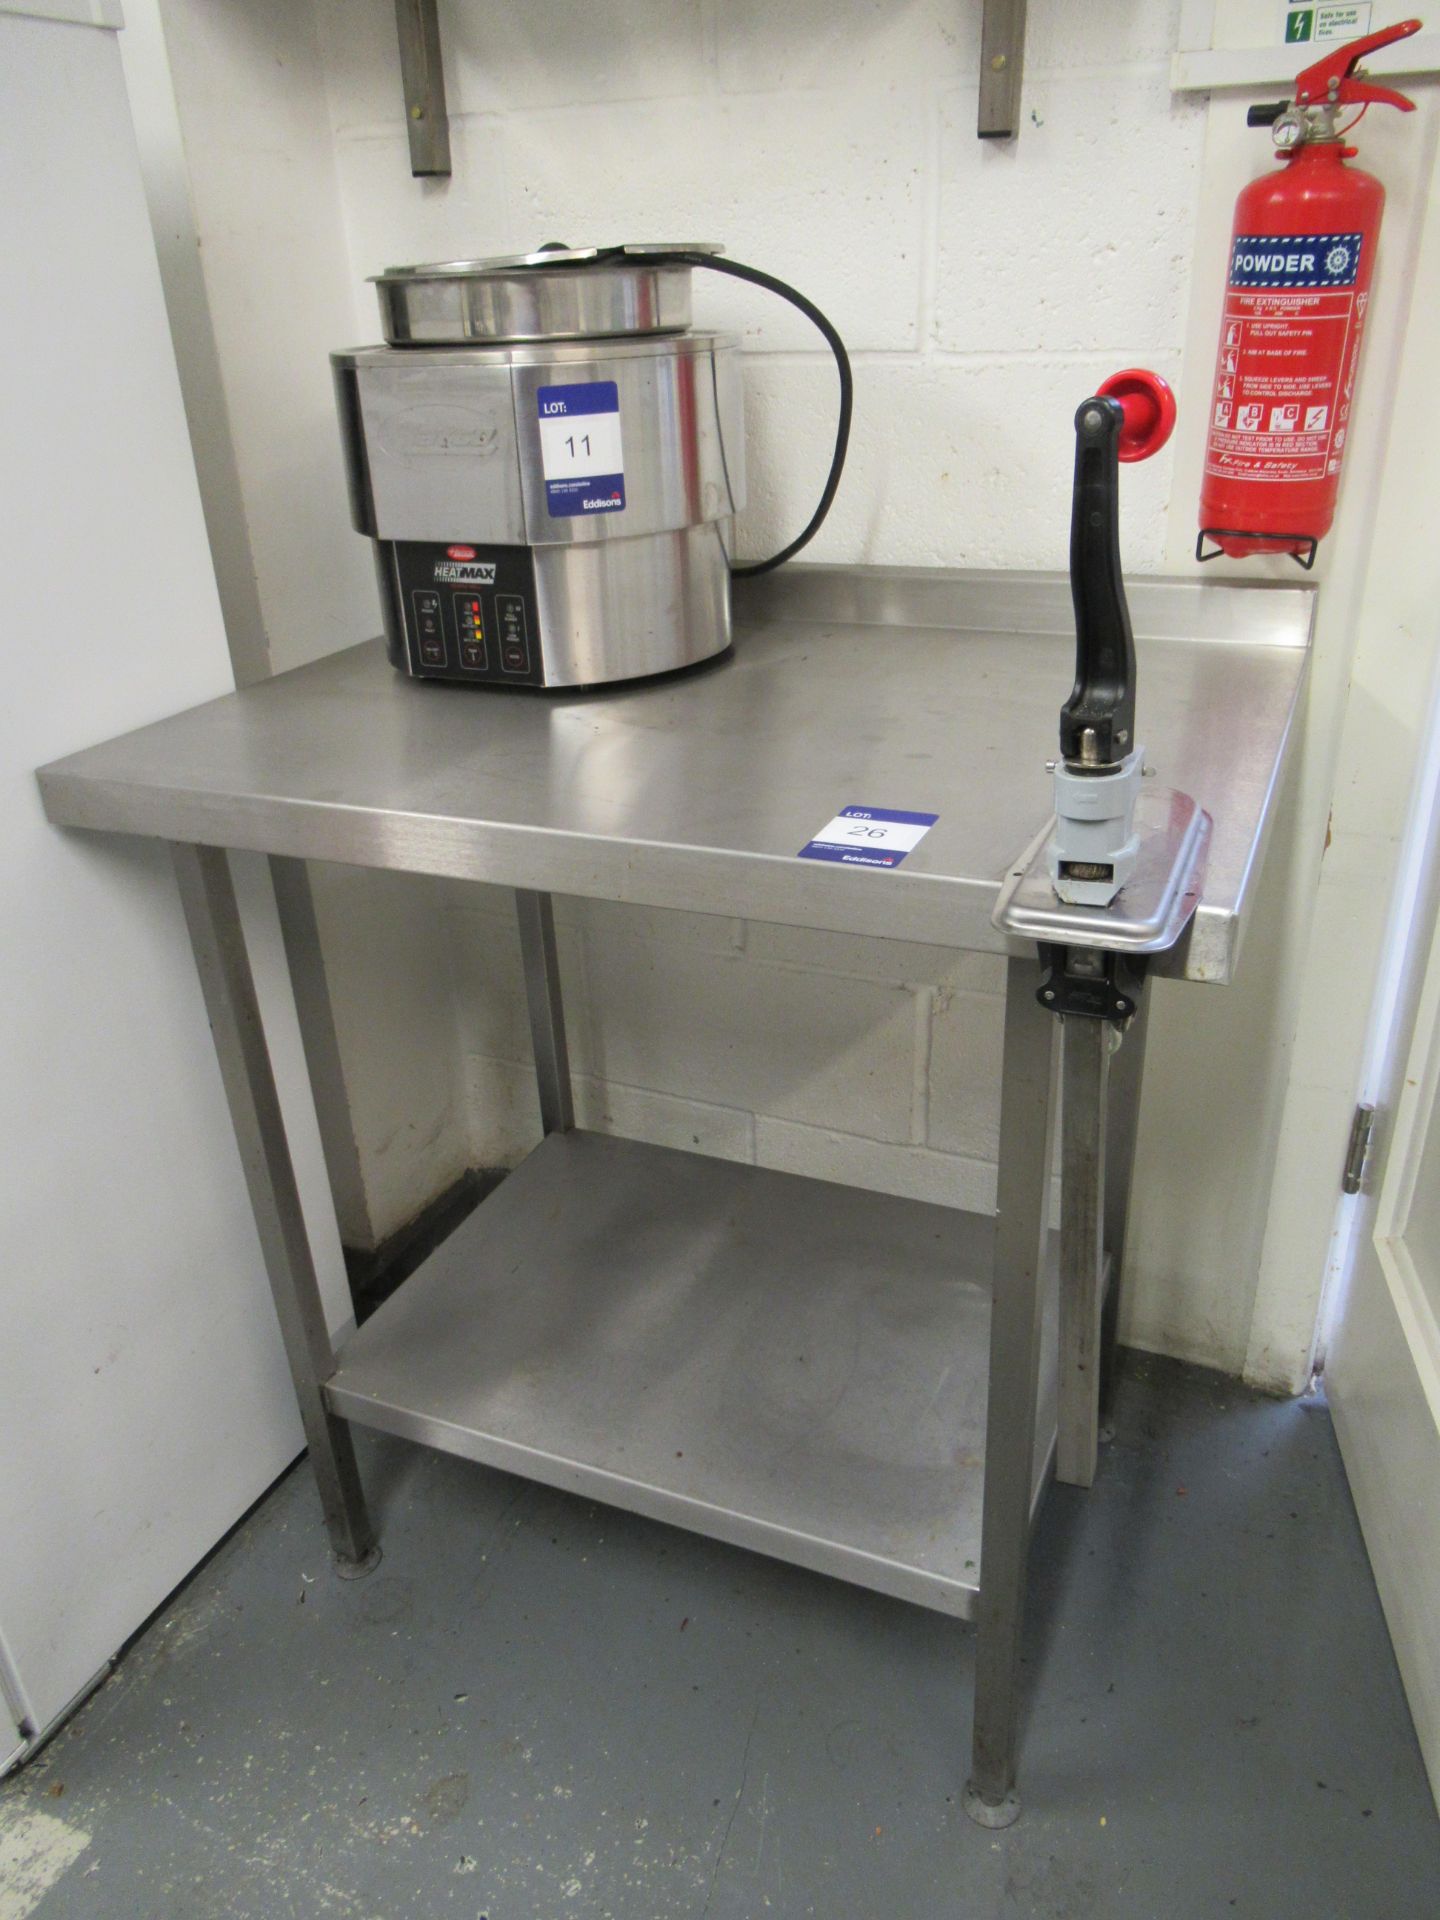 Stainless Steel Preparation Table with Undershelf 900x650mm with Mechanical Tin Opener - Image 2 of 2